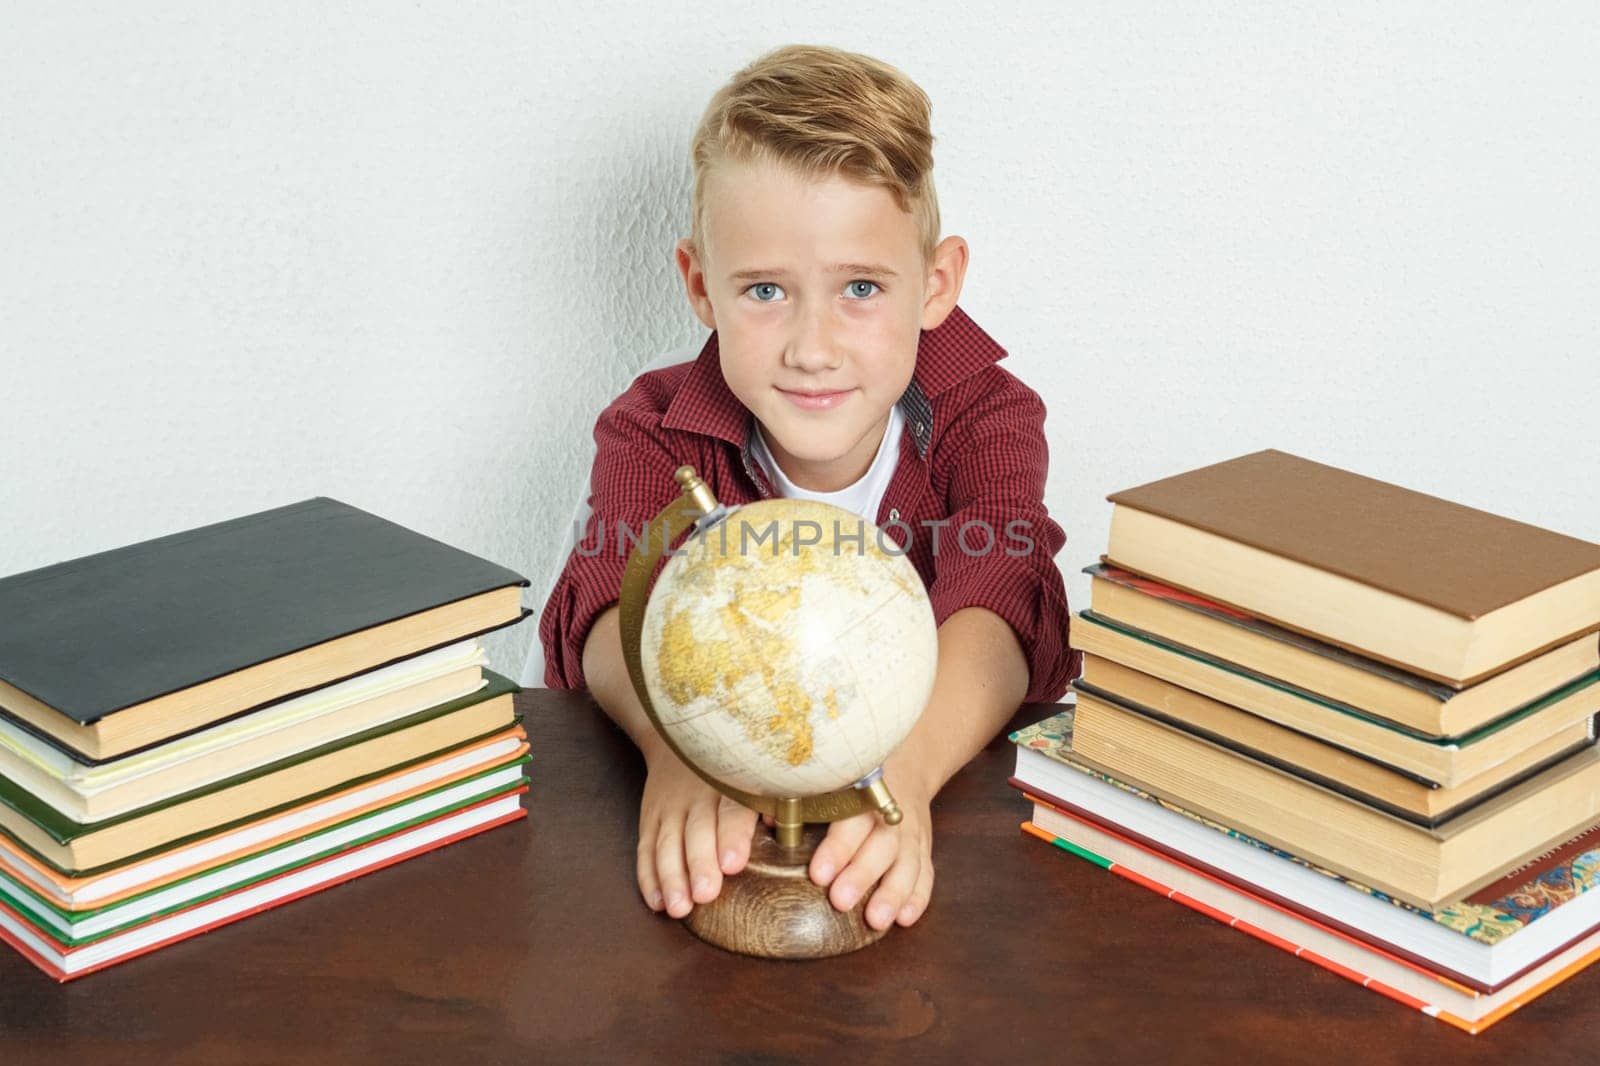 The schoolboy sits at the table, shows the globe. On the table there are books, a globe and an alarm clock. by Sd28DimoN_1976